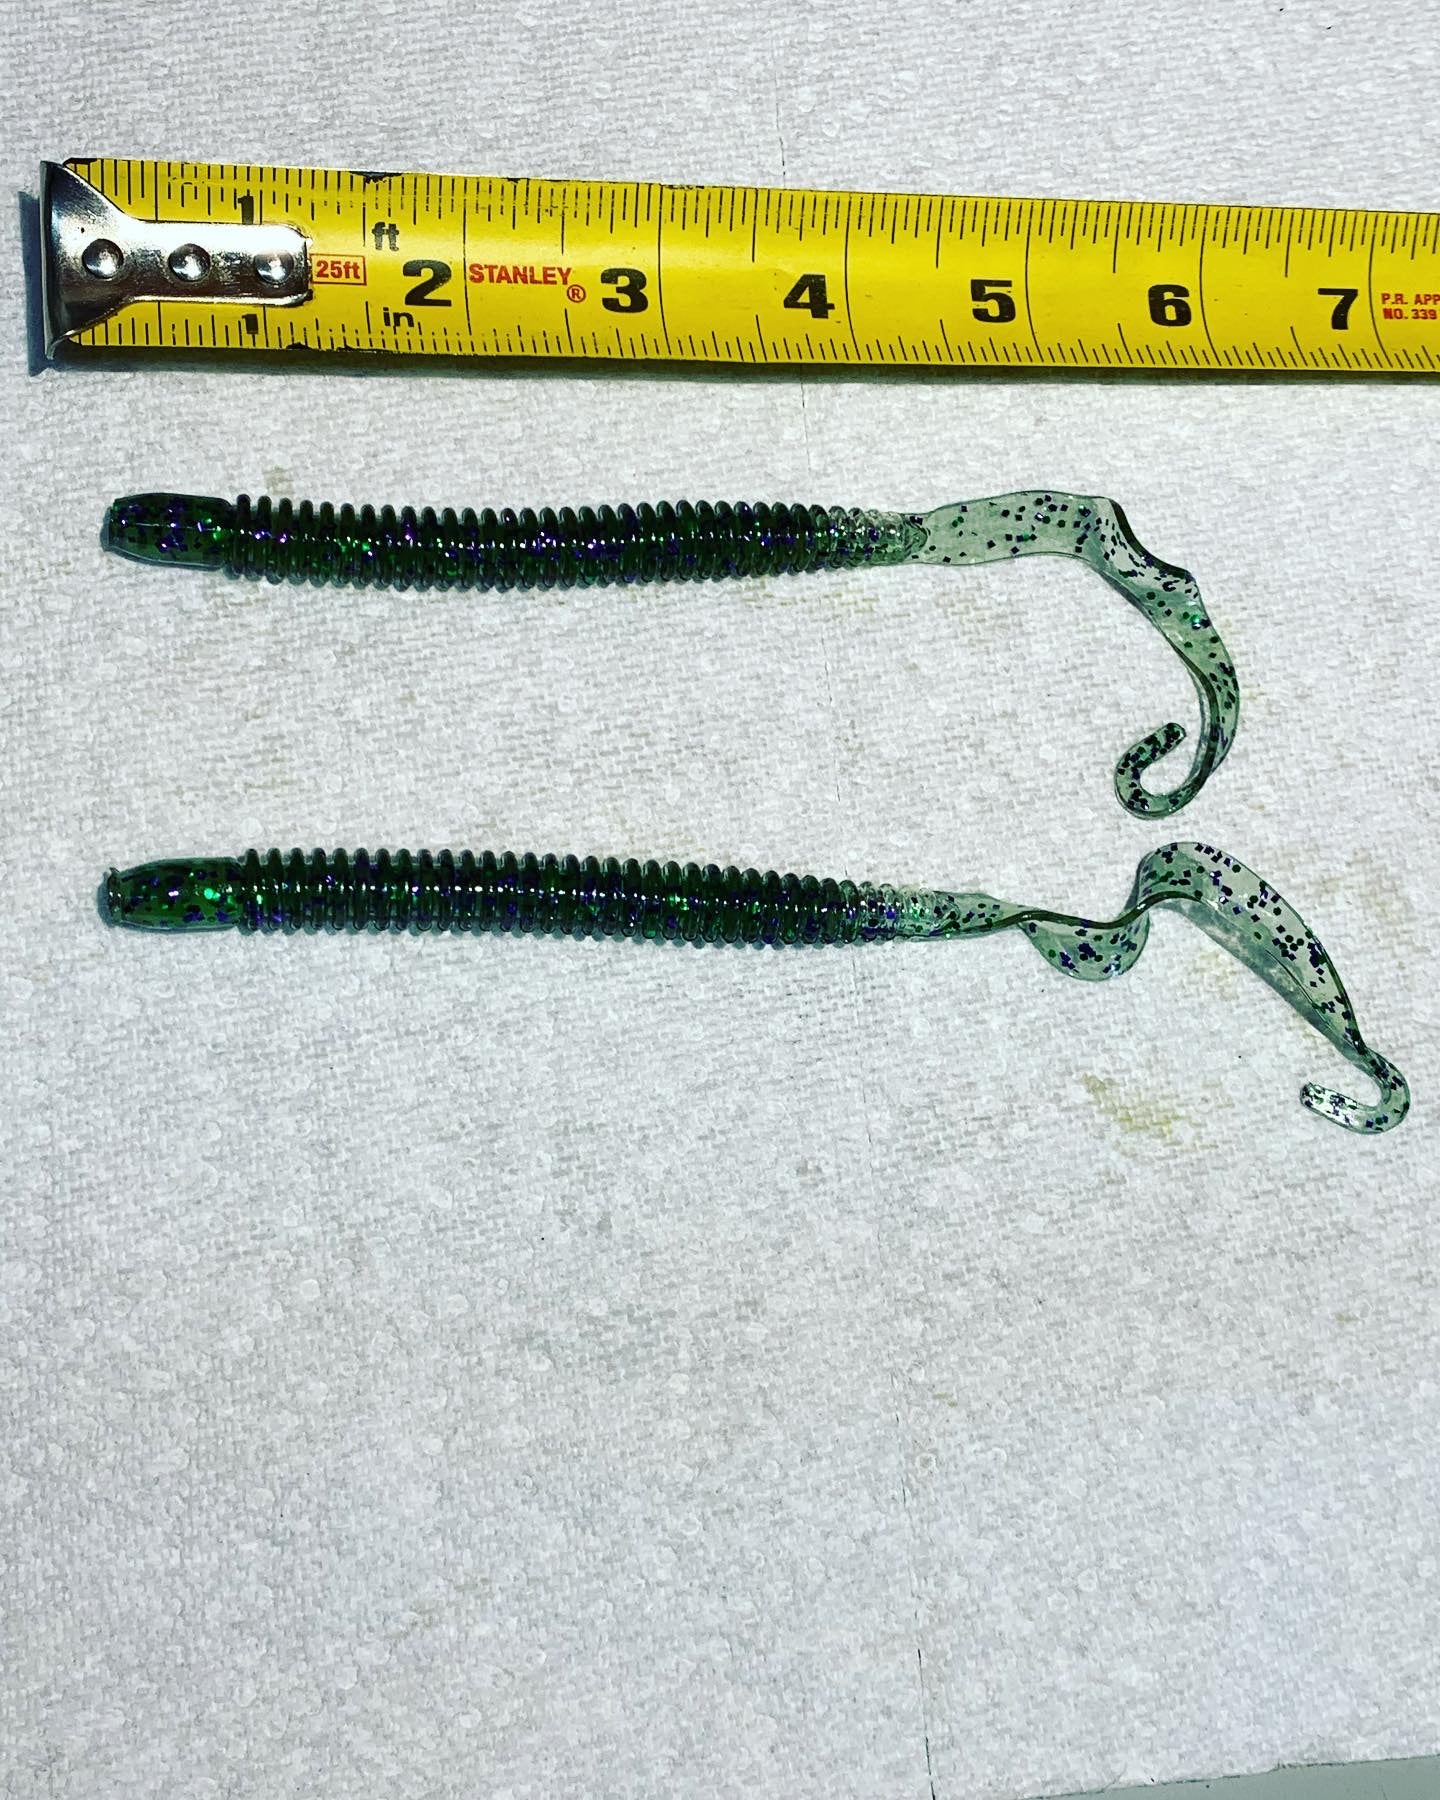 8” ring worm